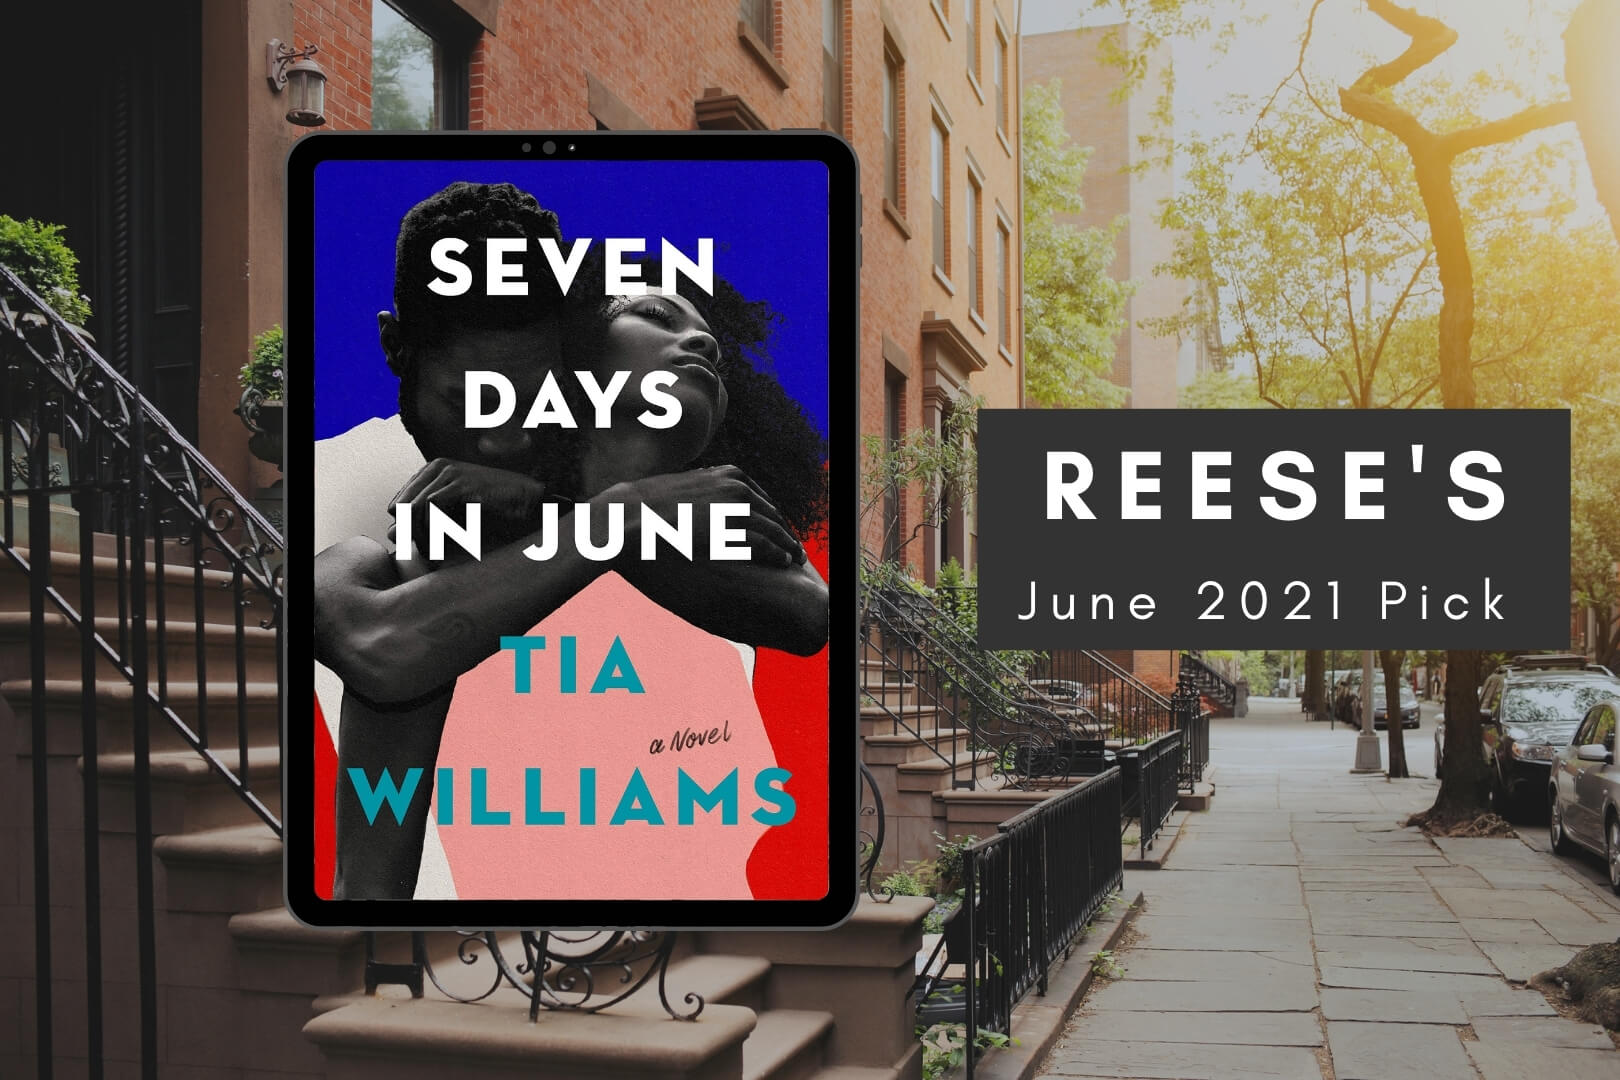 Reese’s June 2021 Book Club Pick is Seven Days in June by Tia Williams